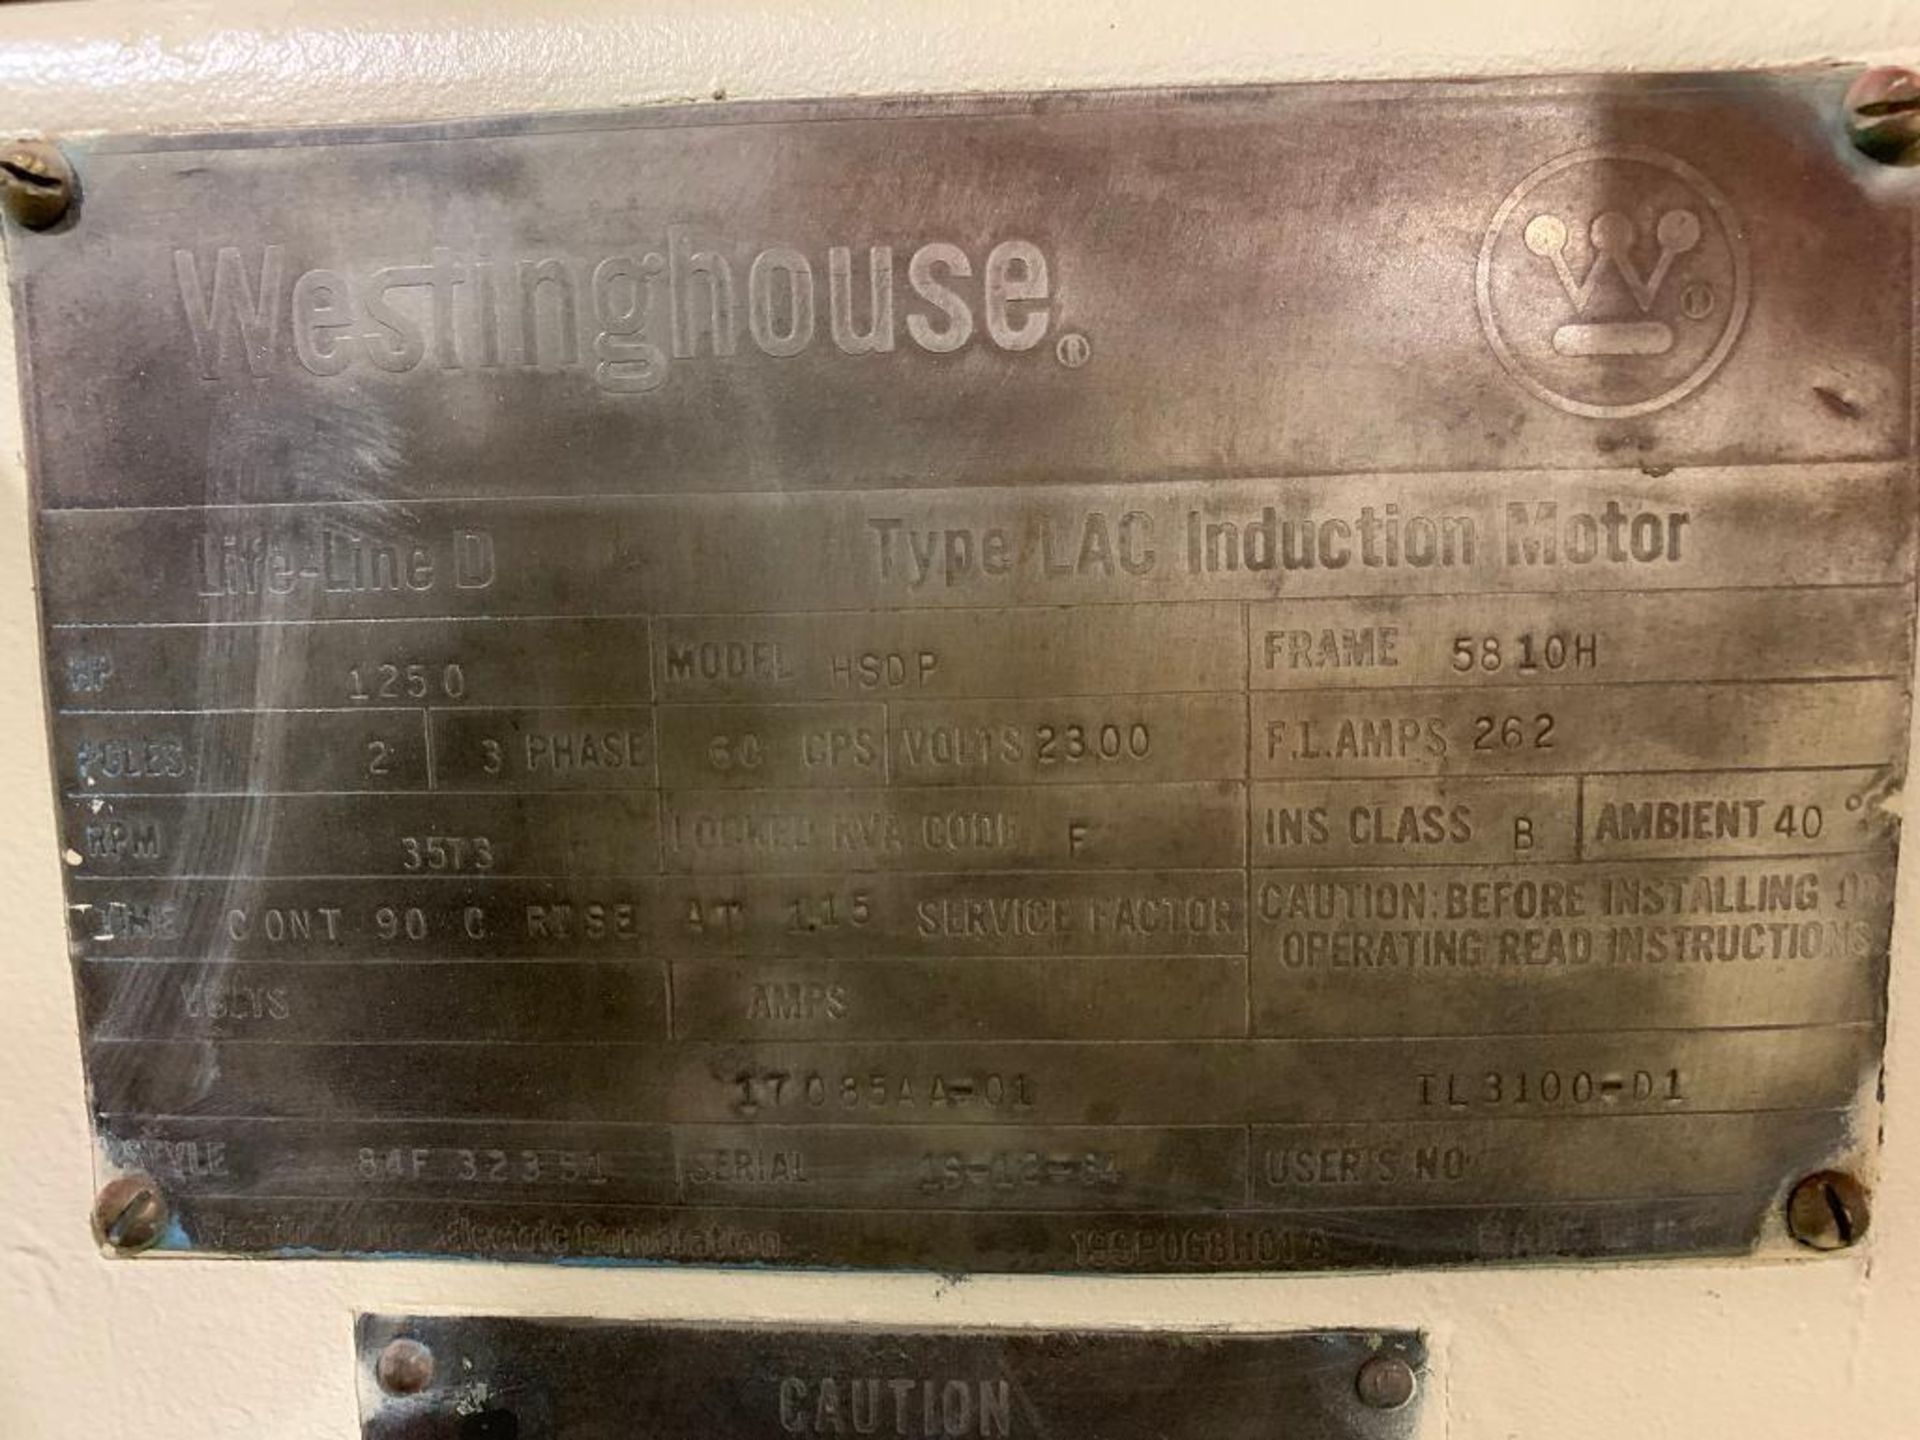 Westinghouse 1250-HP Electric Motor, 3573 RPM, 2300 V, 3 Phase, FR: 5810H - Image 3 of 3